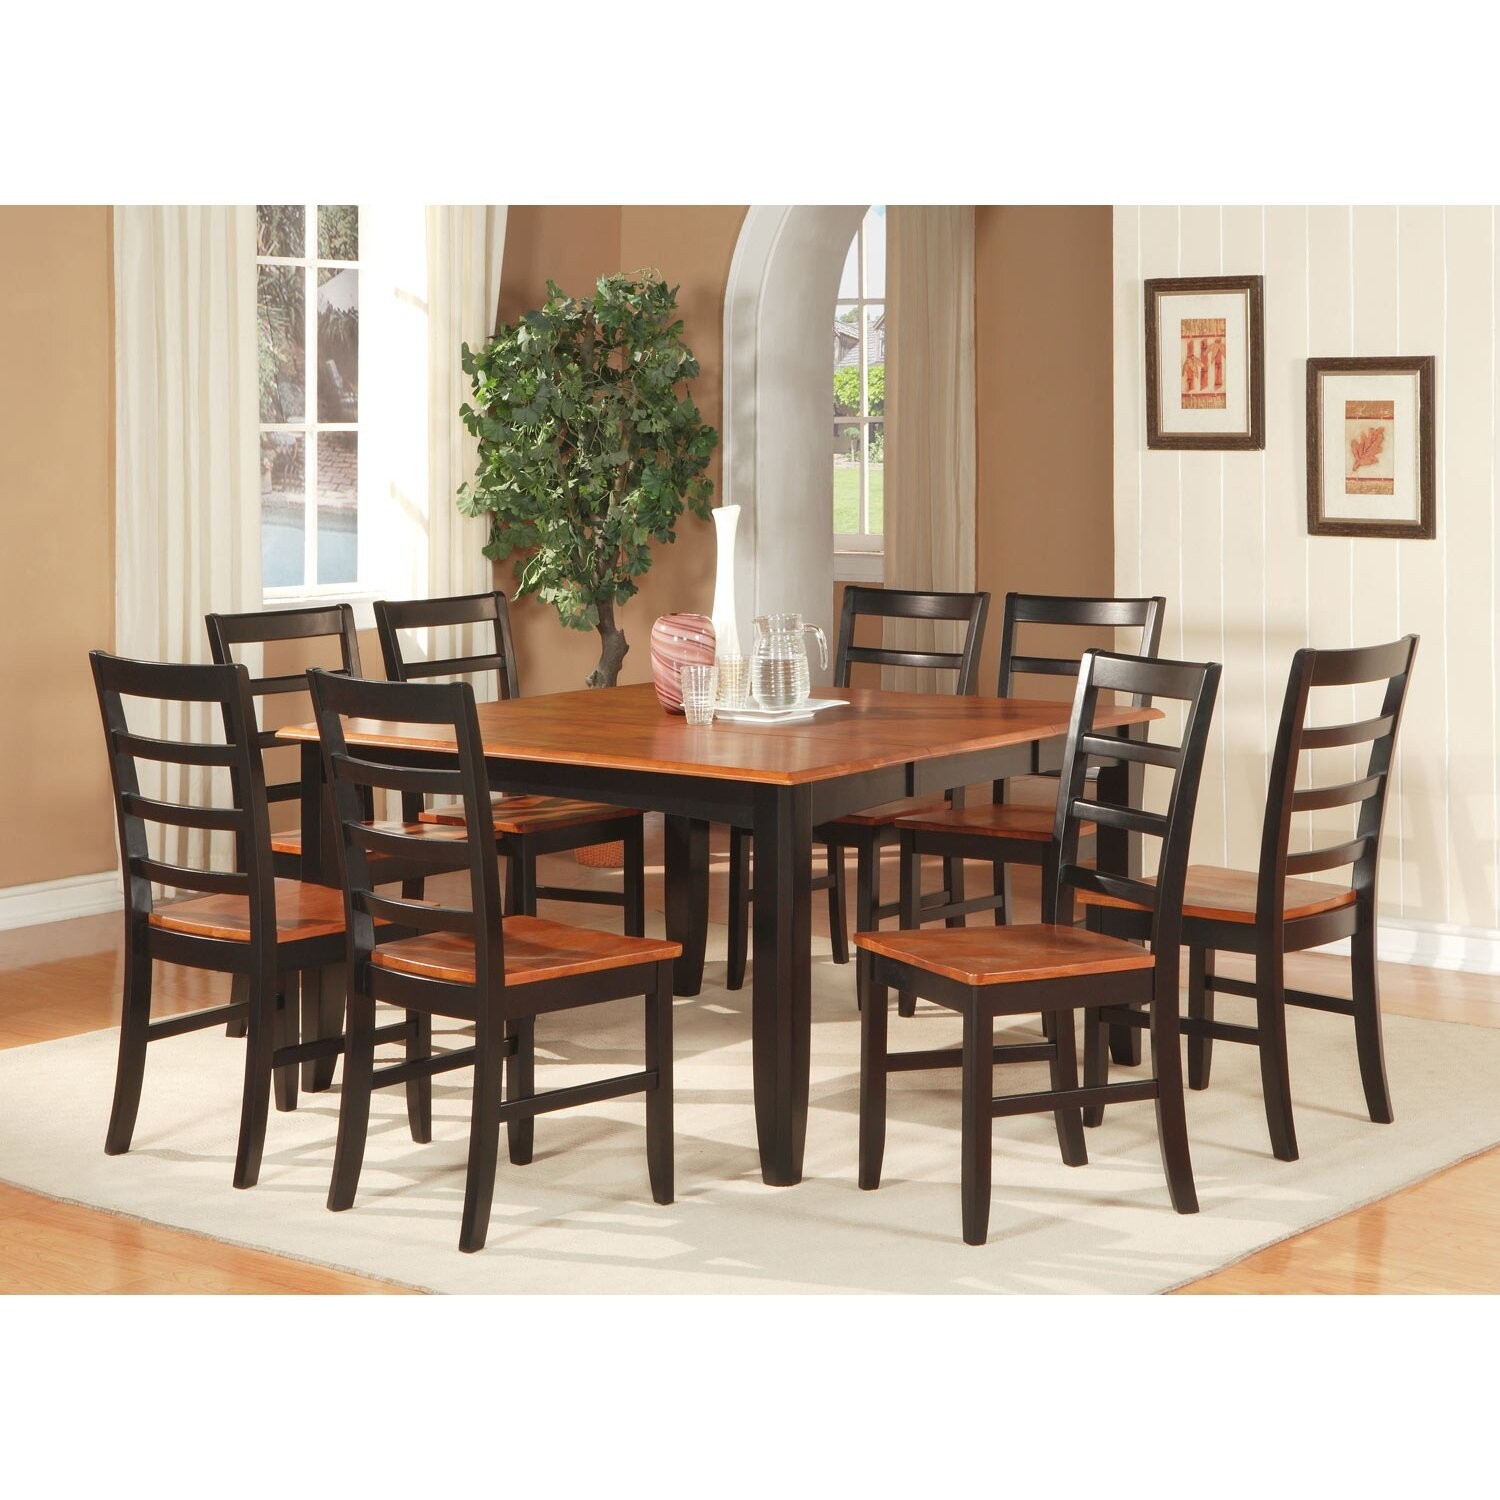 Square Dining Room Table Seats 8 - Ideas on Foter